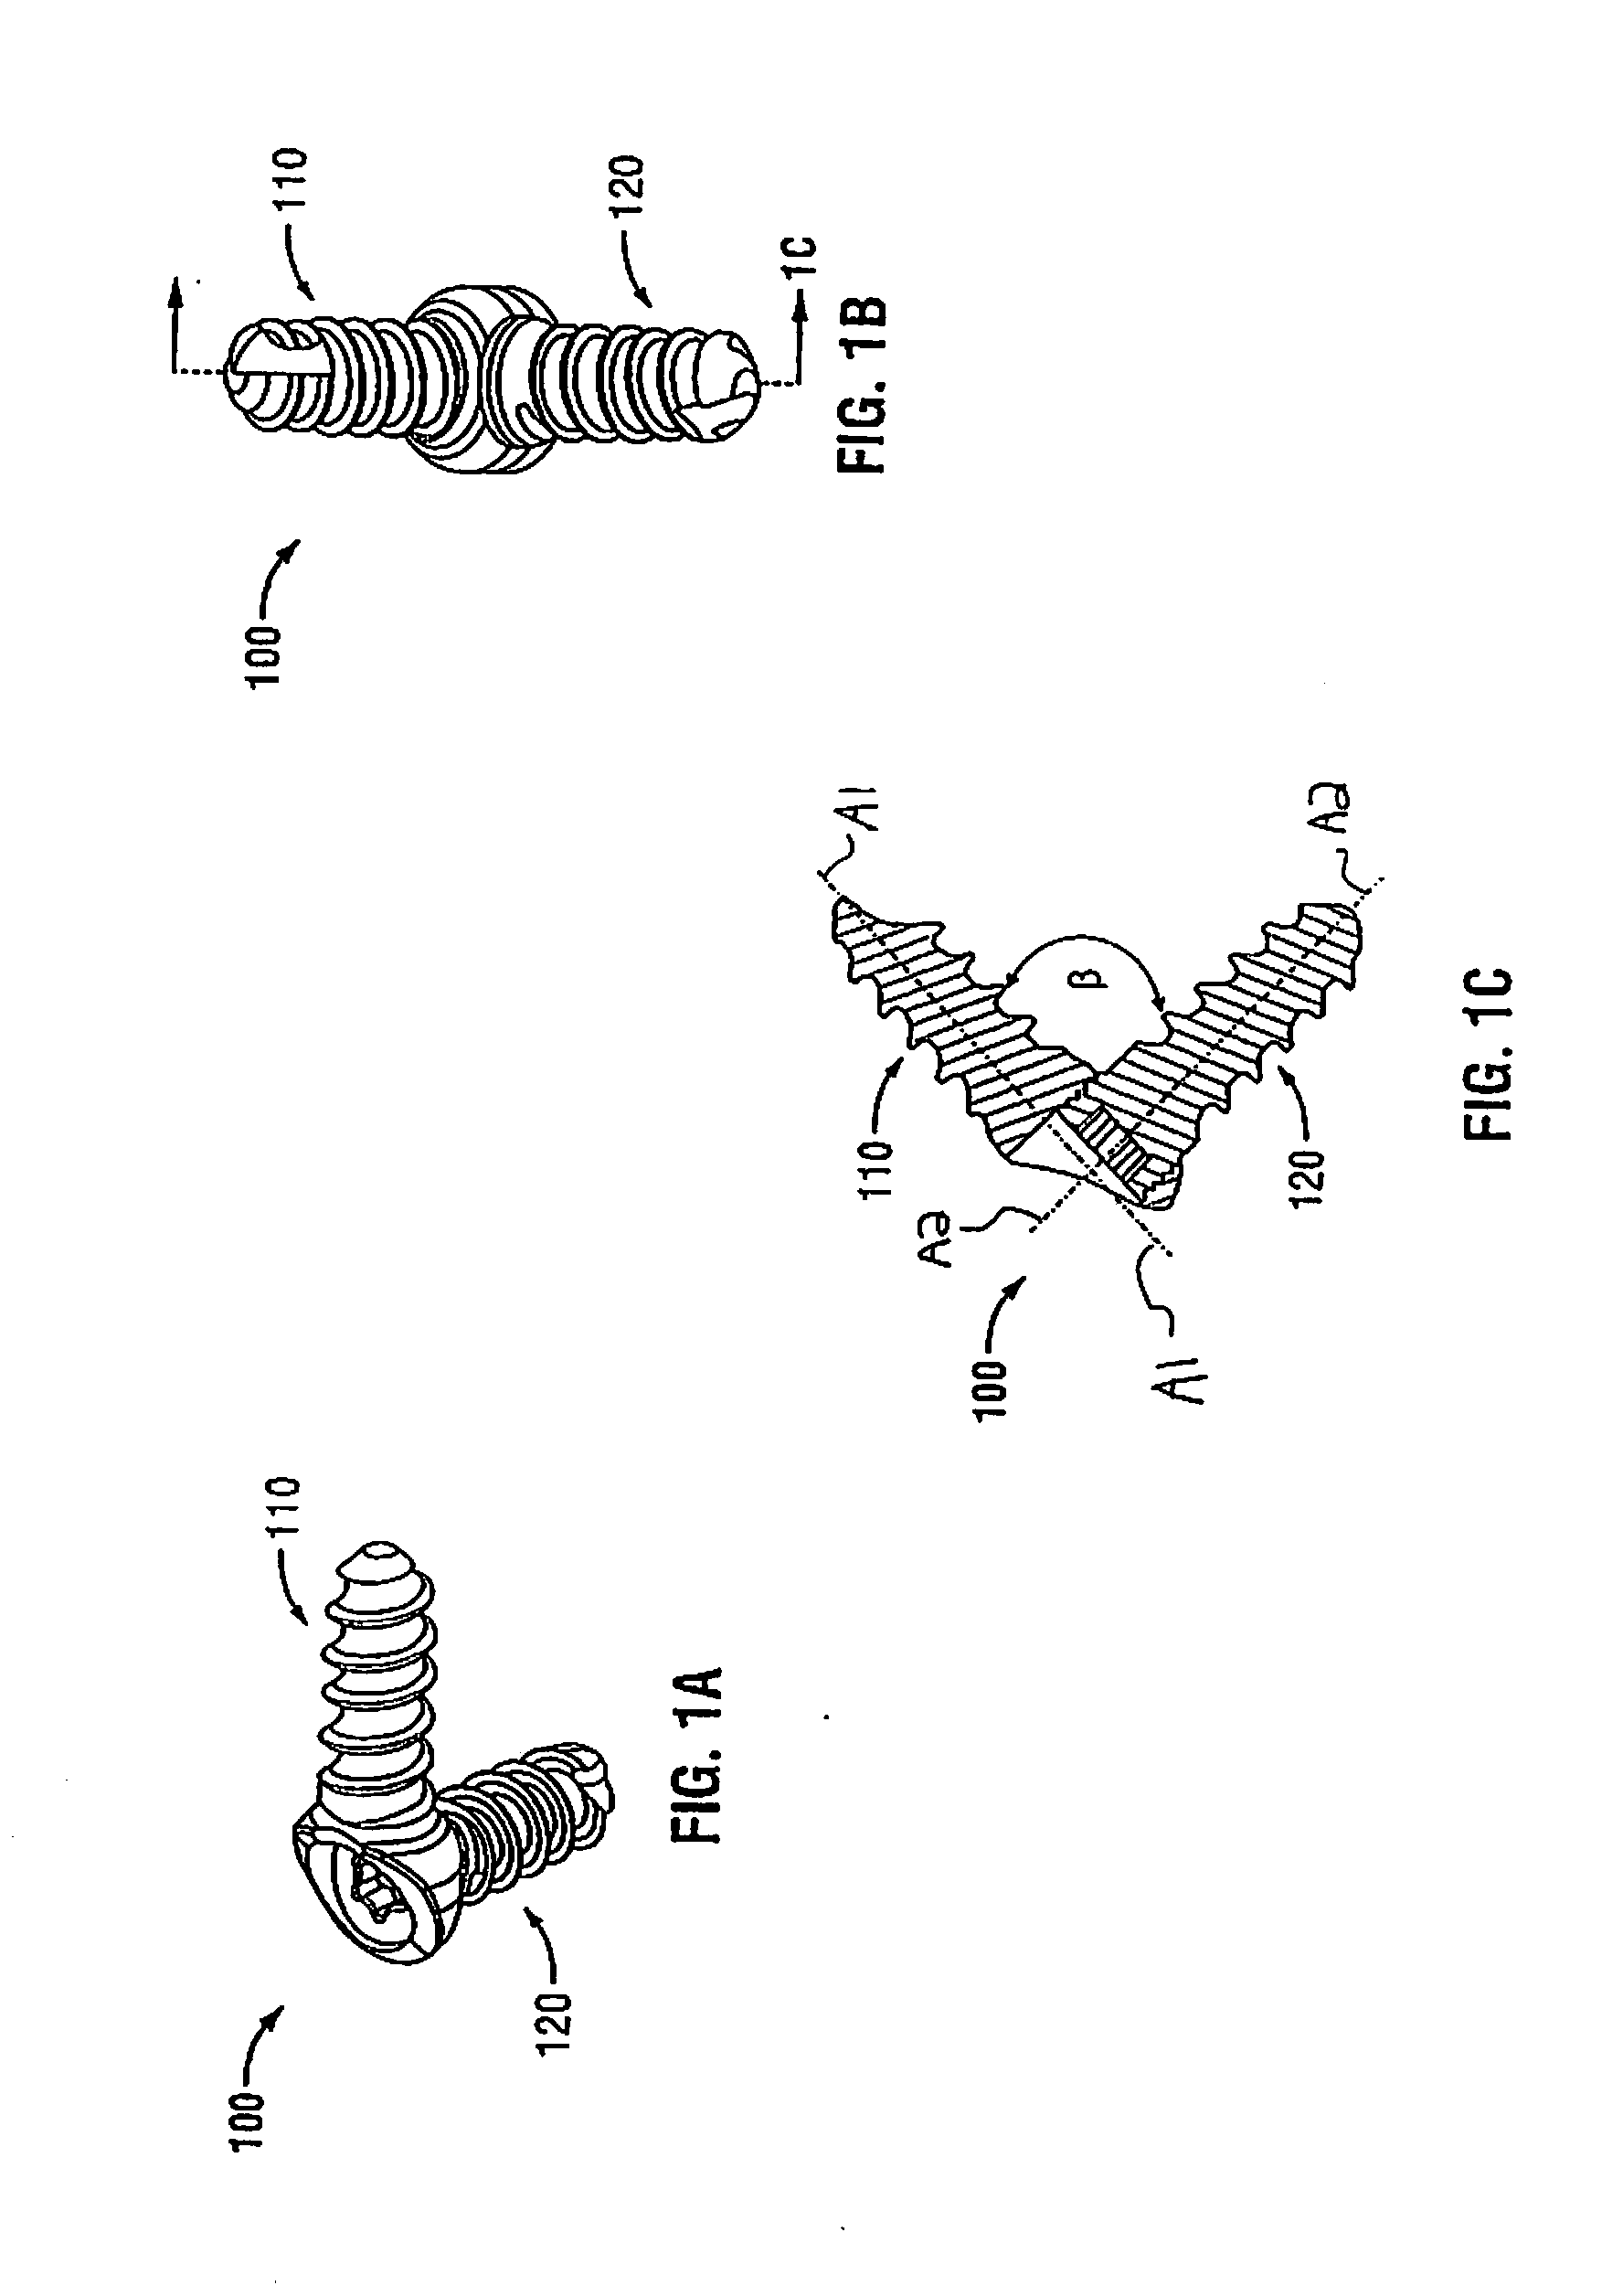 Spinal fixation apparatus and methods